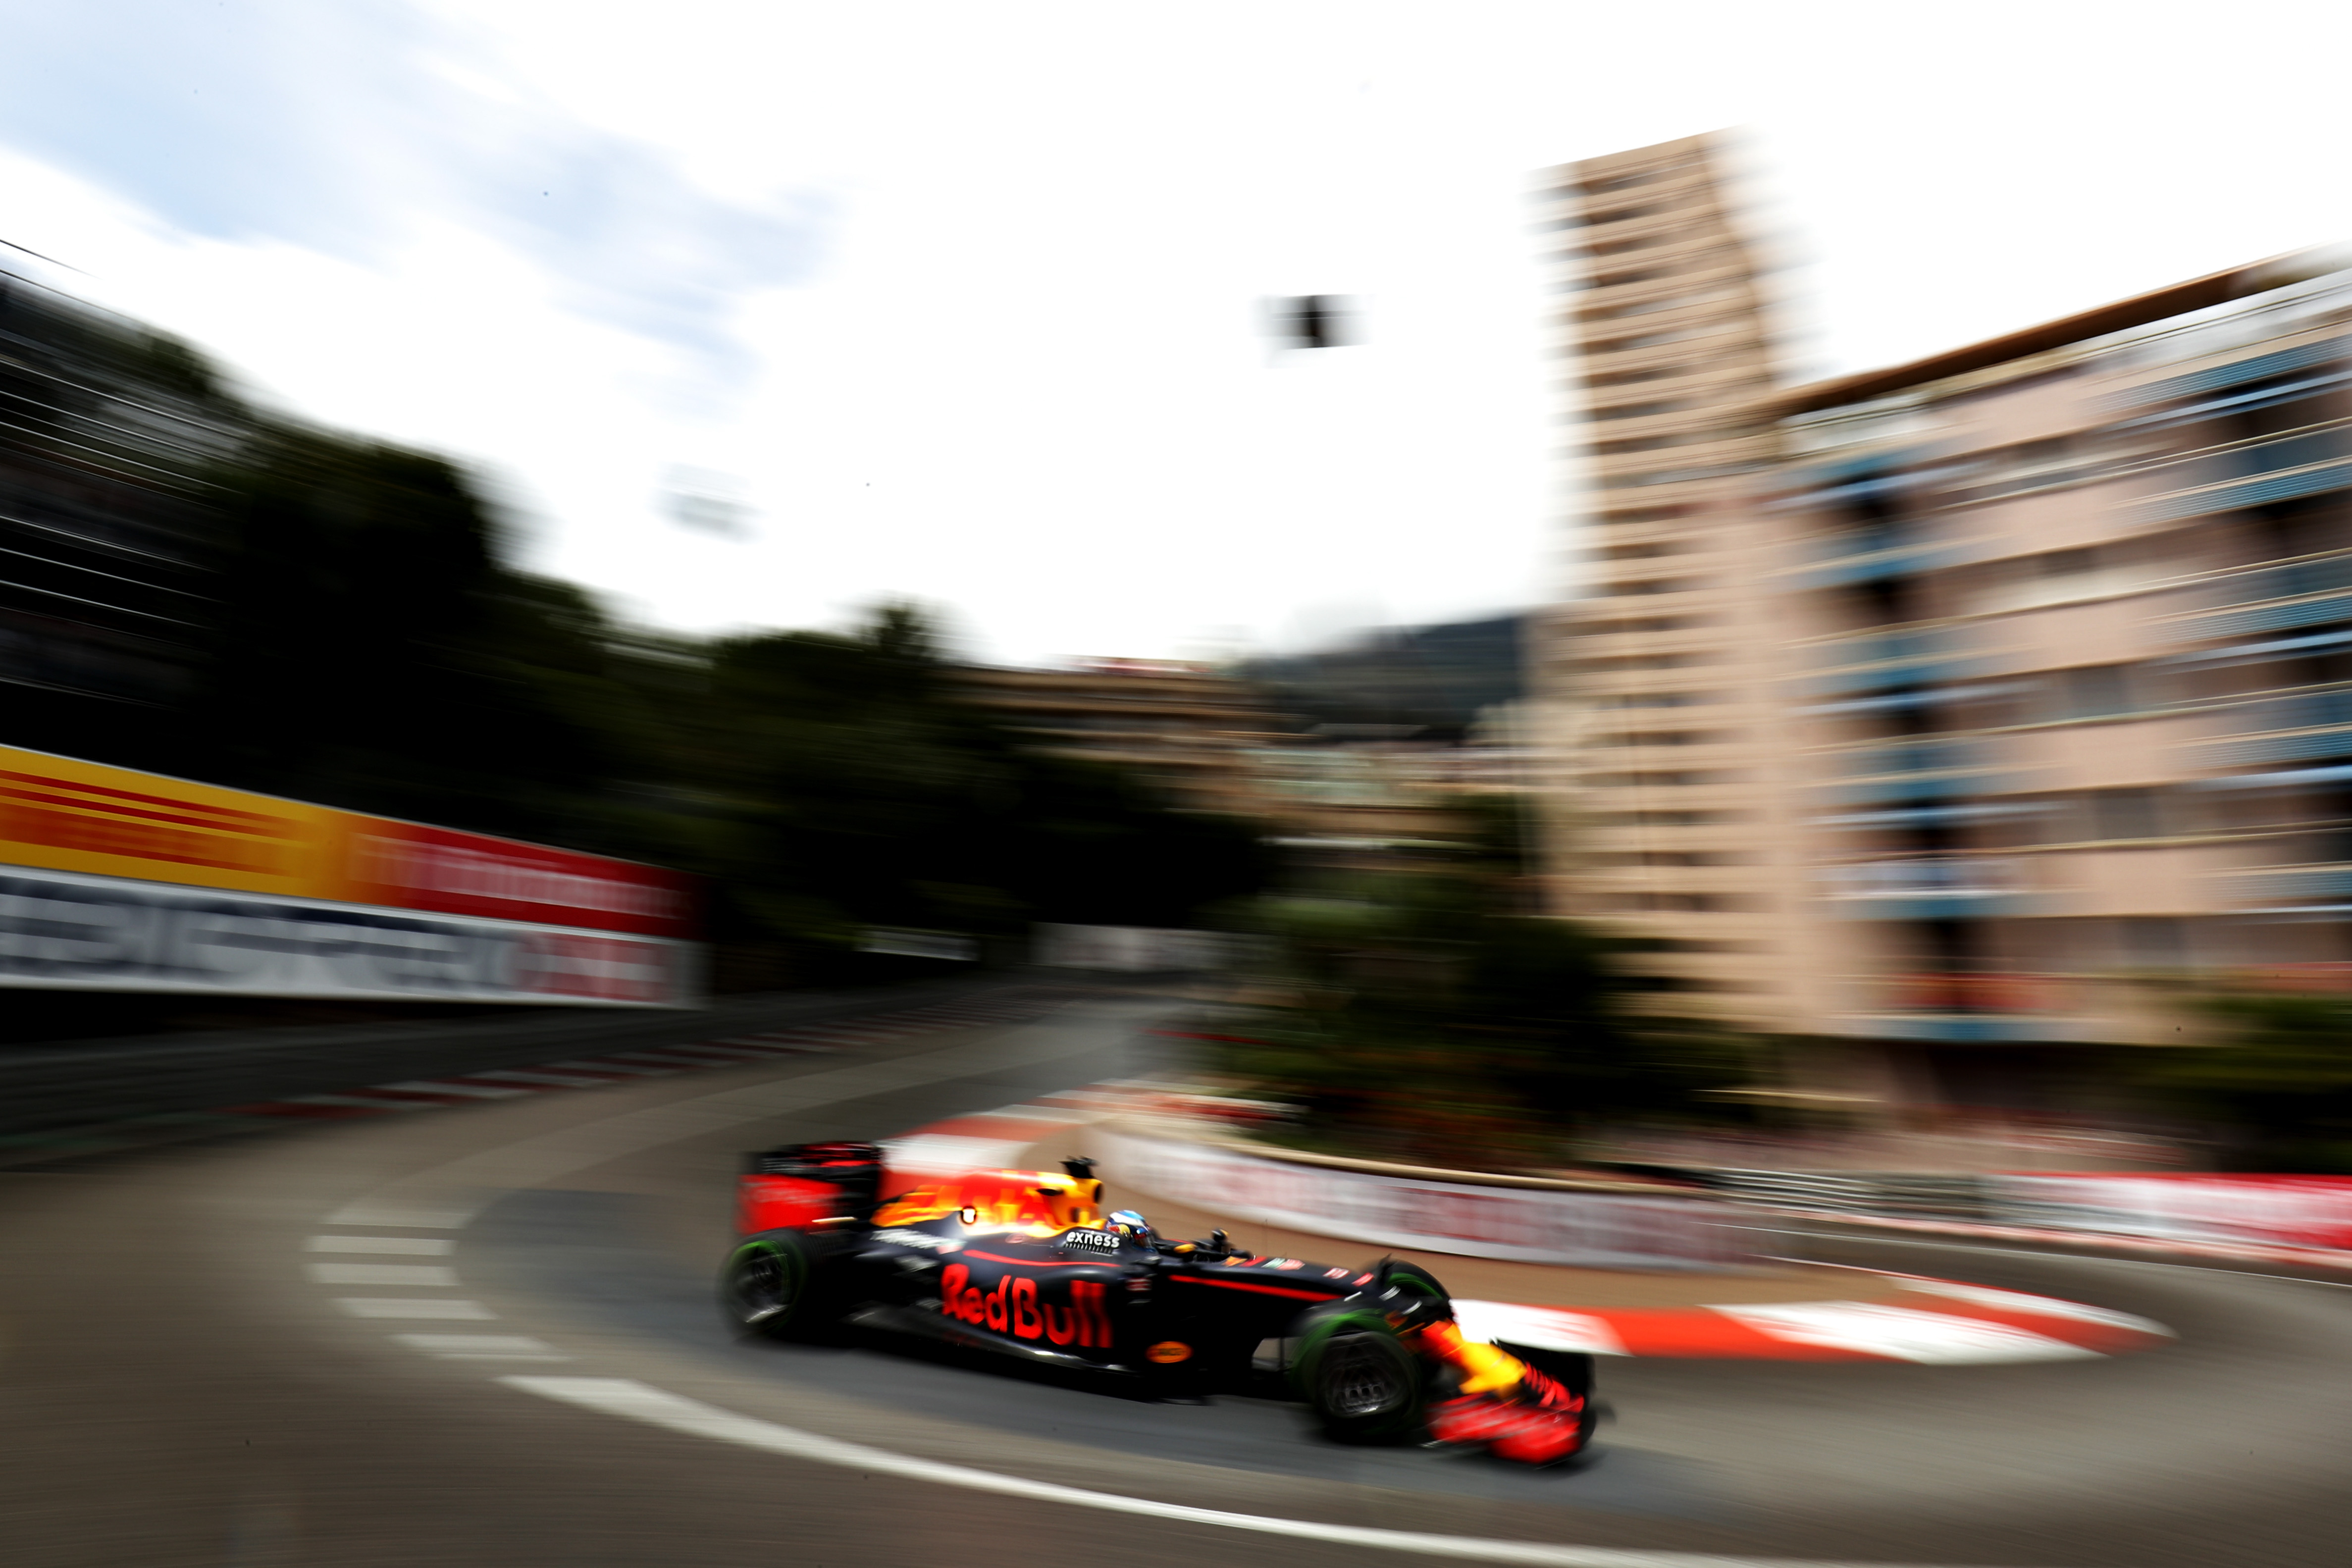 MONTE-CARLO, MONACO - MAY 29: Daniel Ricciardo of Australia driving the (3) Red Bull Racing Red Bull-TAG Heuer RB12 TAG Heuer on track during the Monaco Formula One Grand Prix at Circuit de Monaco on May 29, 2016 in Monte-Carlo, Monaco. (Photo by Lars Baron/Getty Images)